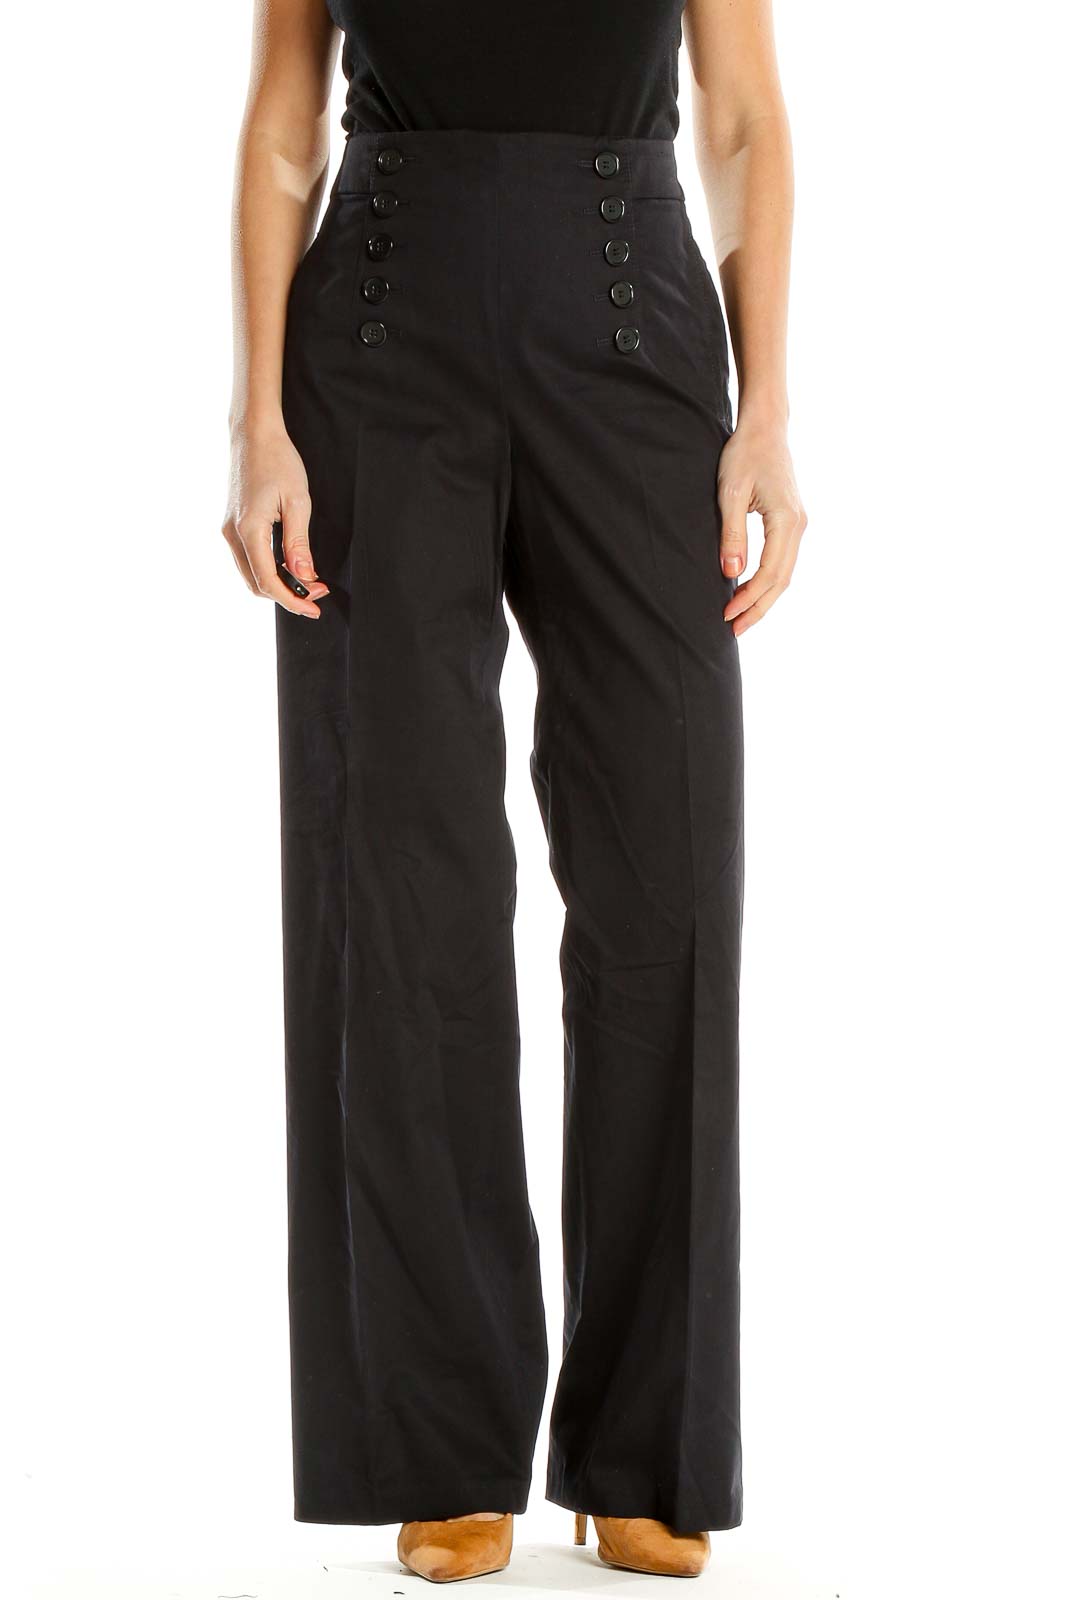 Black Textured Sailor All Day Wear Trousers Front